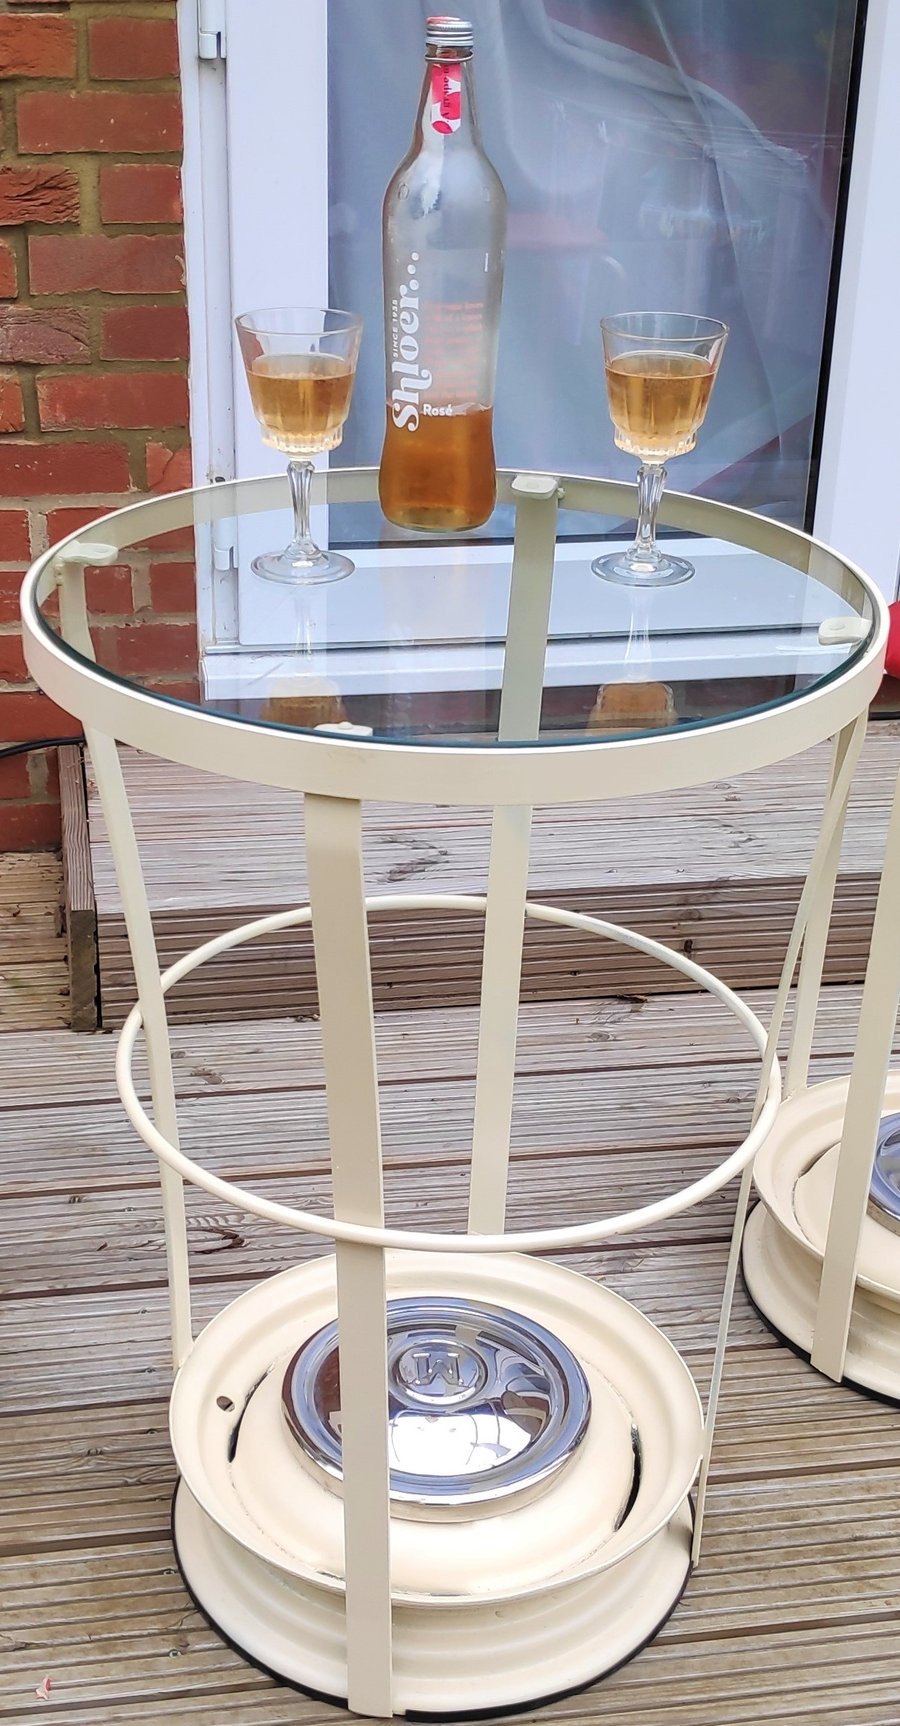 Morris Minor Wheel Drinks Table - Car parts furniture, side table